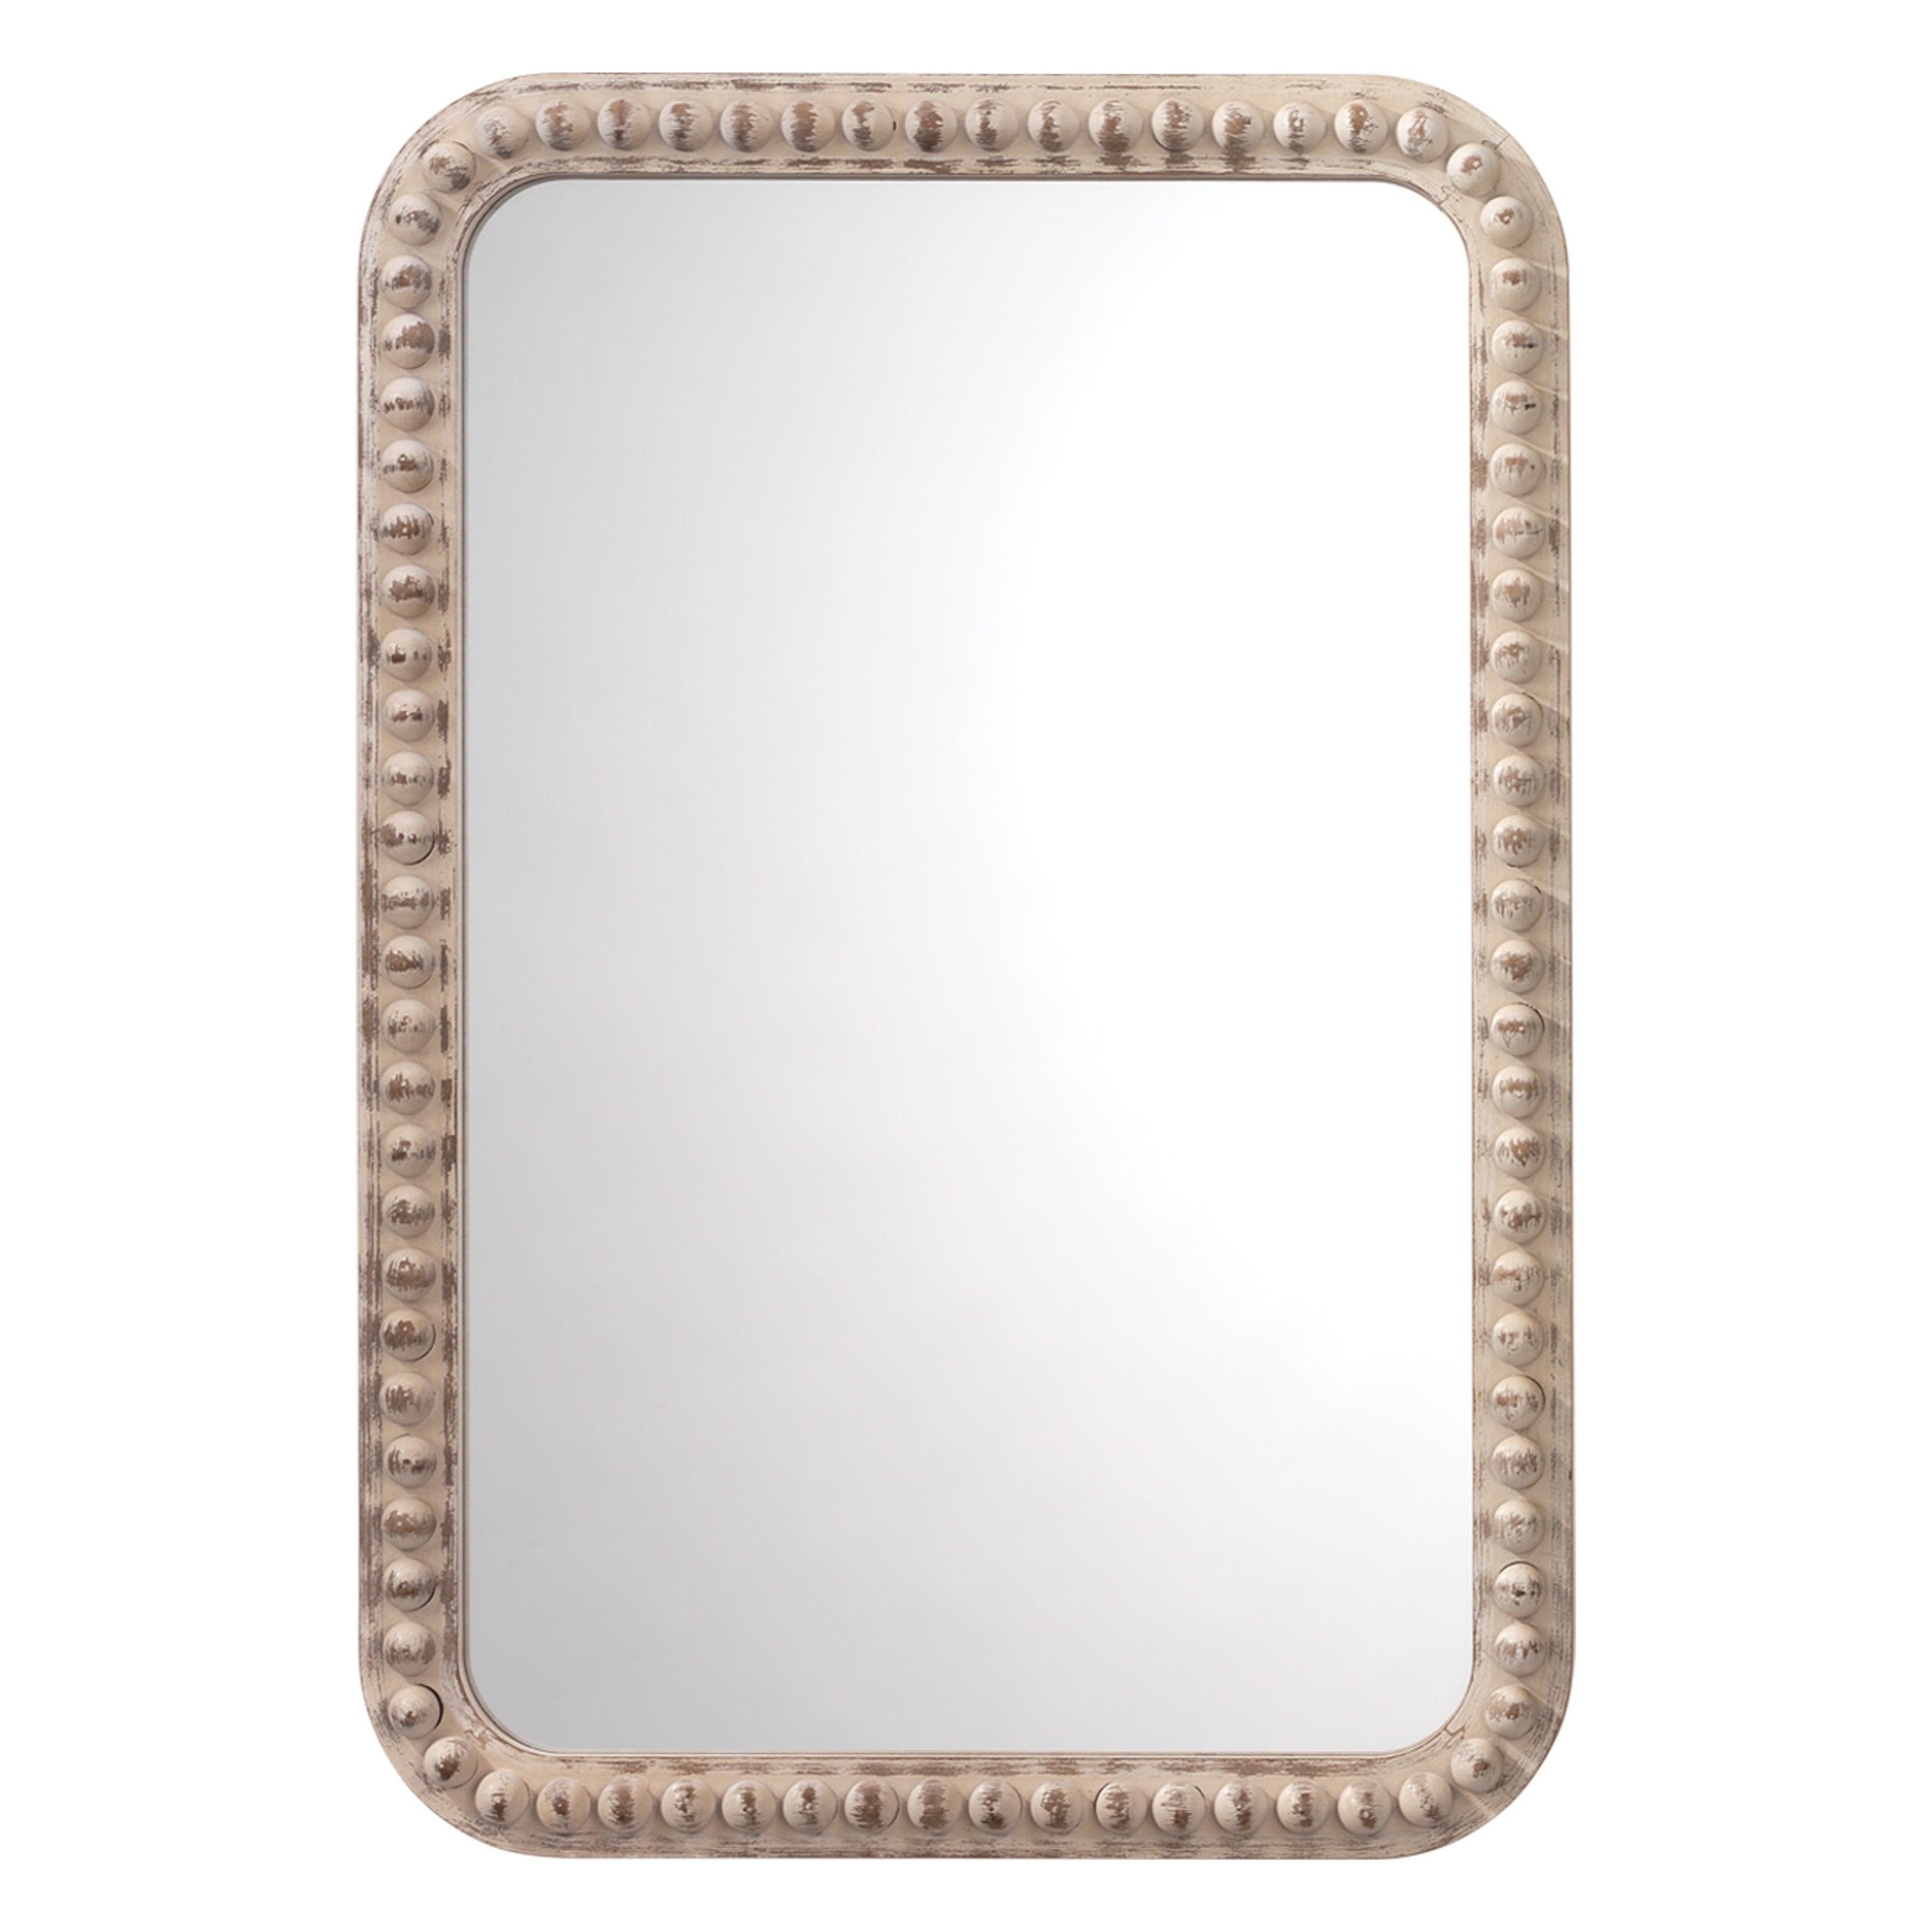 Jamie Young Company - 6AUDR-RECTWH - Rectangle Audrey Mirror -  - White Washed